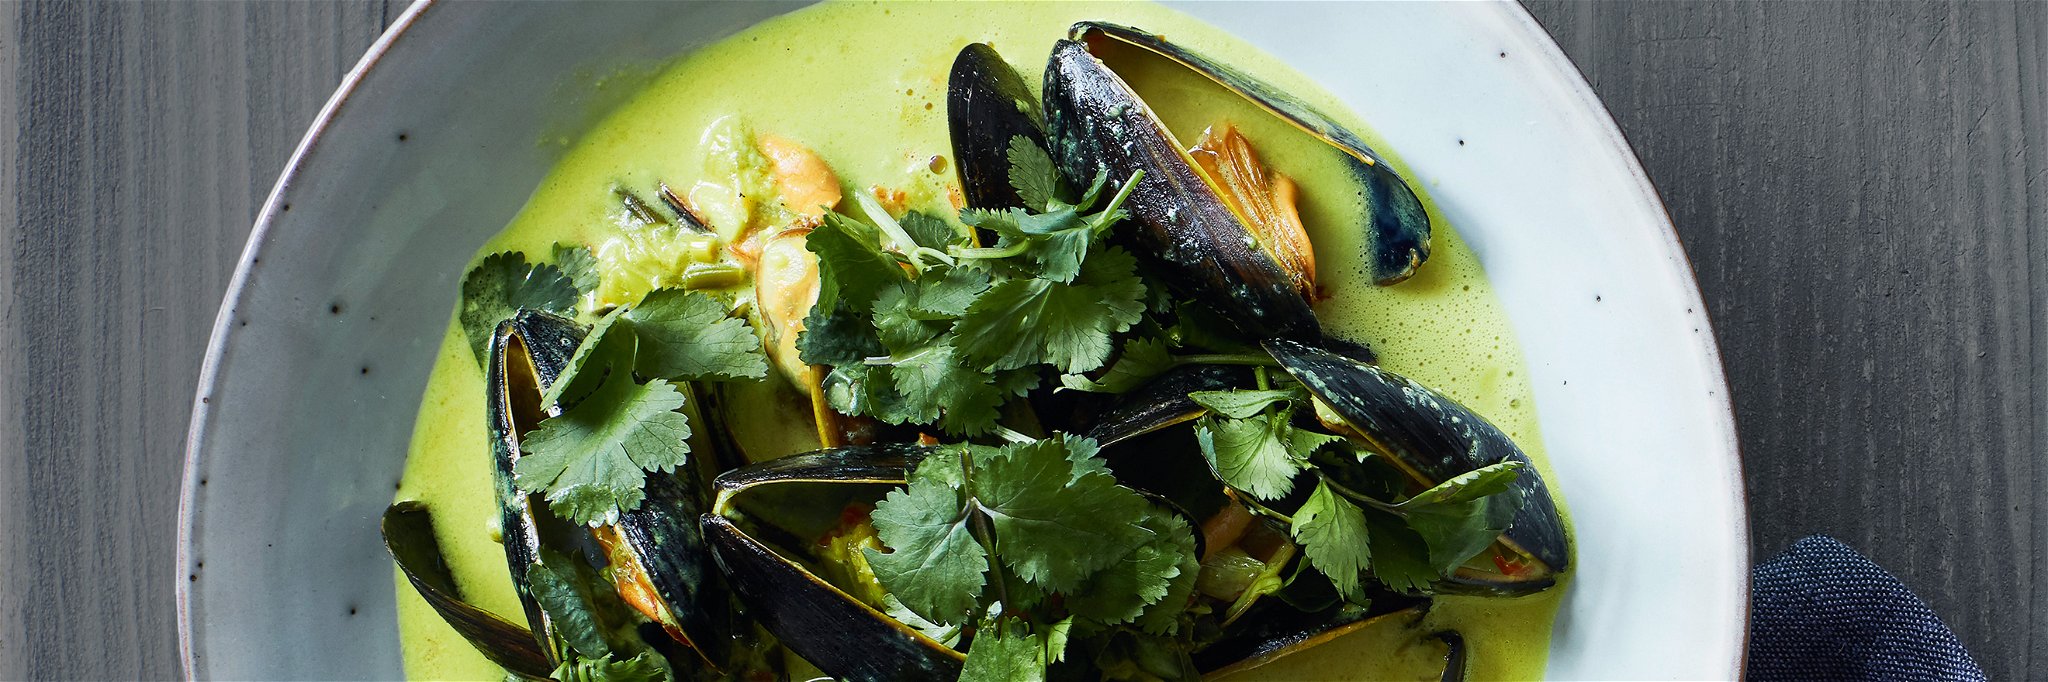 Thai-style Mussels